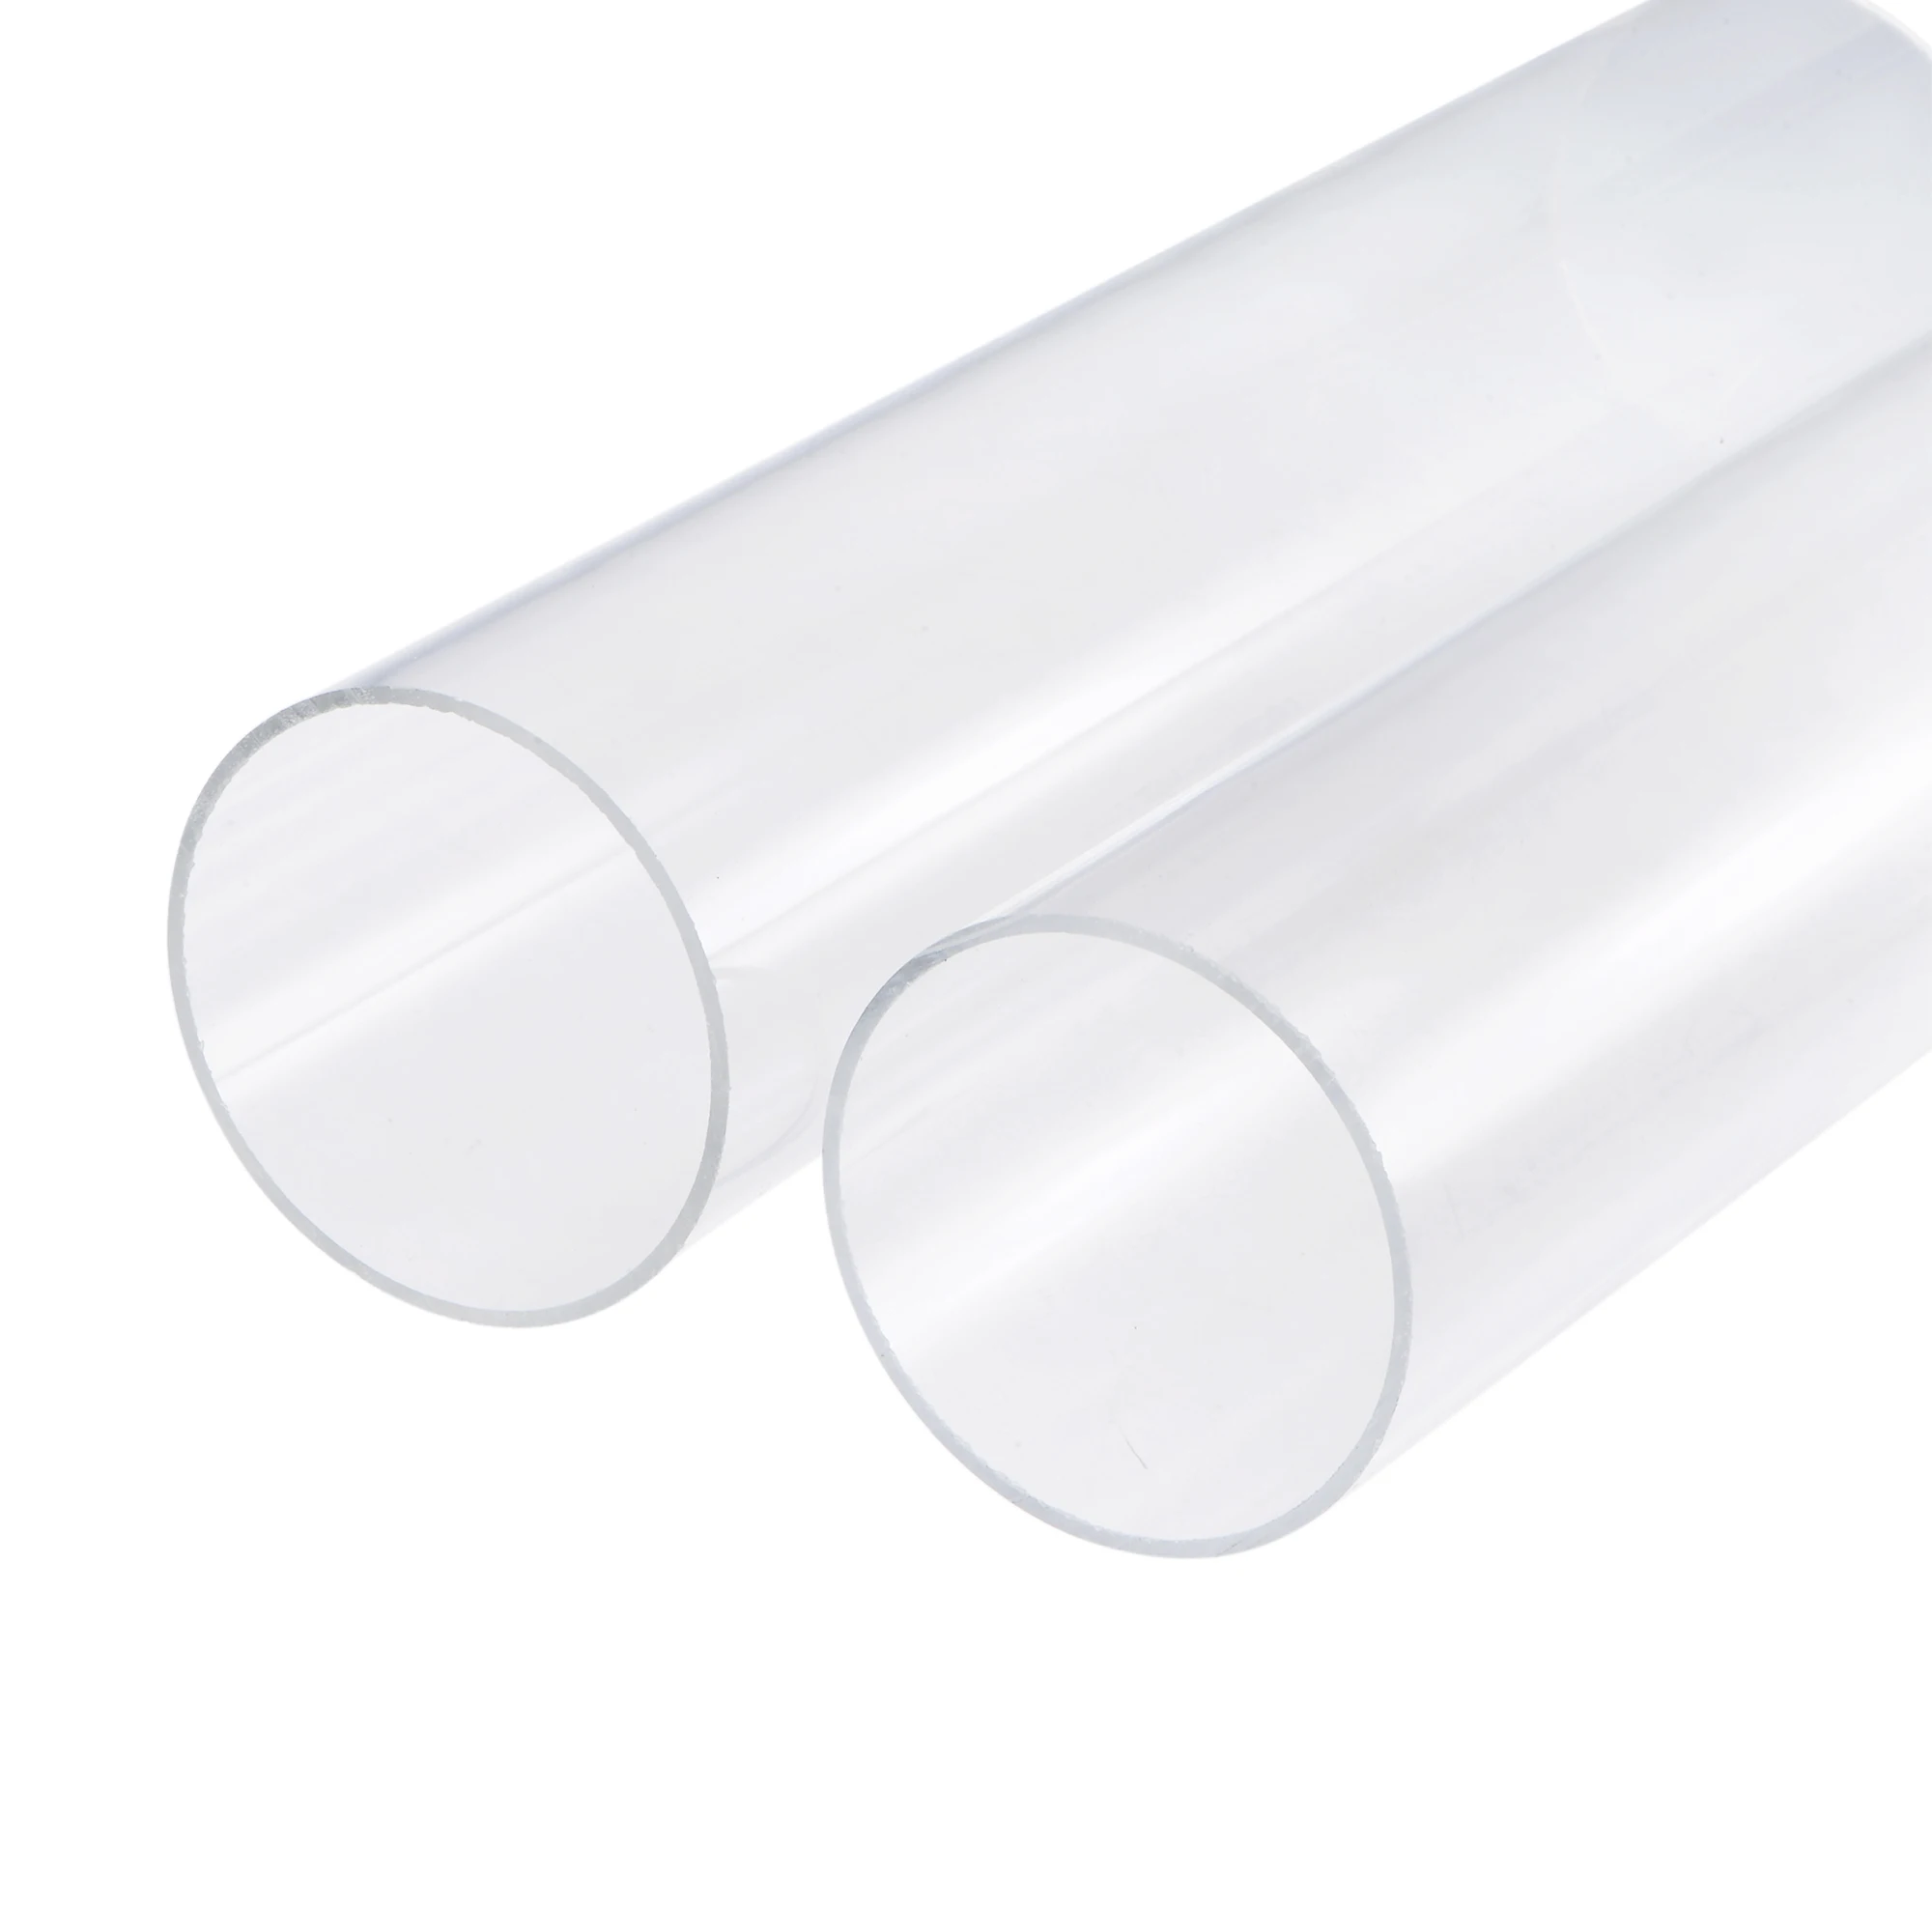 

uxcell Acrylic Pipe Rigid Round Tube Clear 2 5/8" ID 2 3/4" OD 12" High Impact for Lighting, Models, Plumbing, Crafts 2 Pack